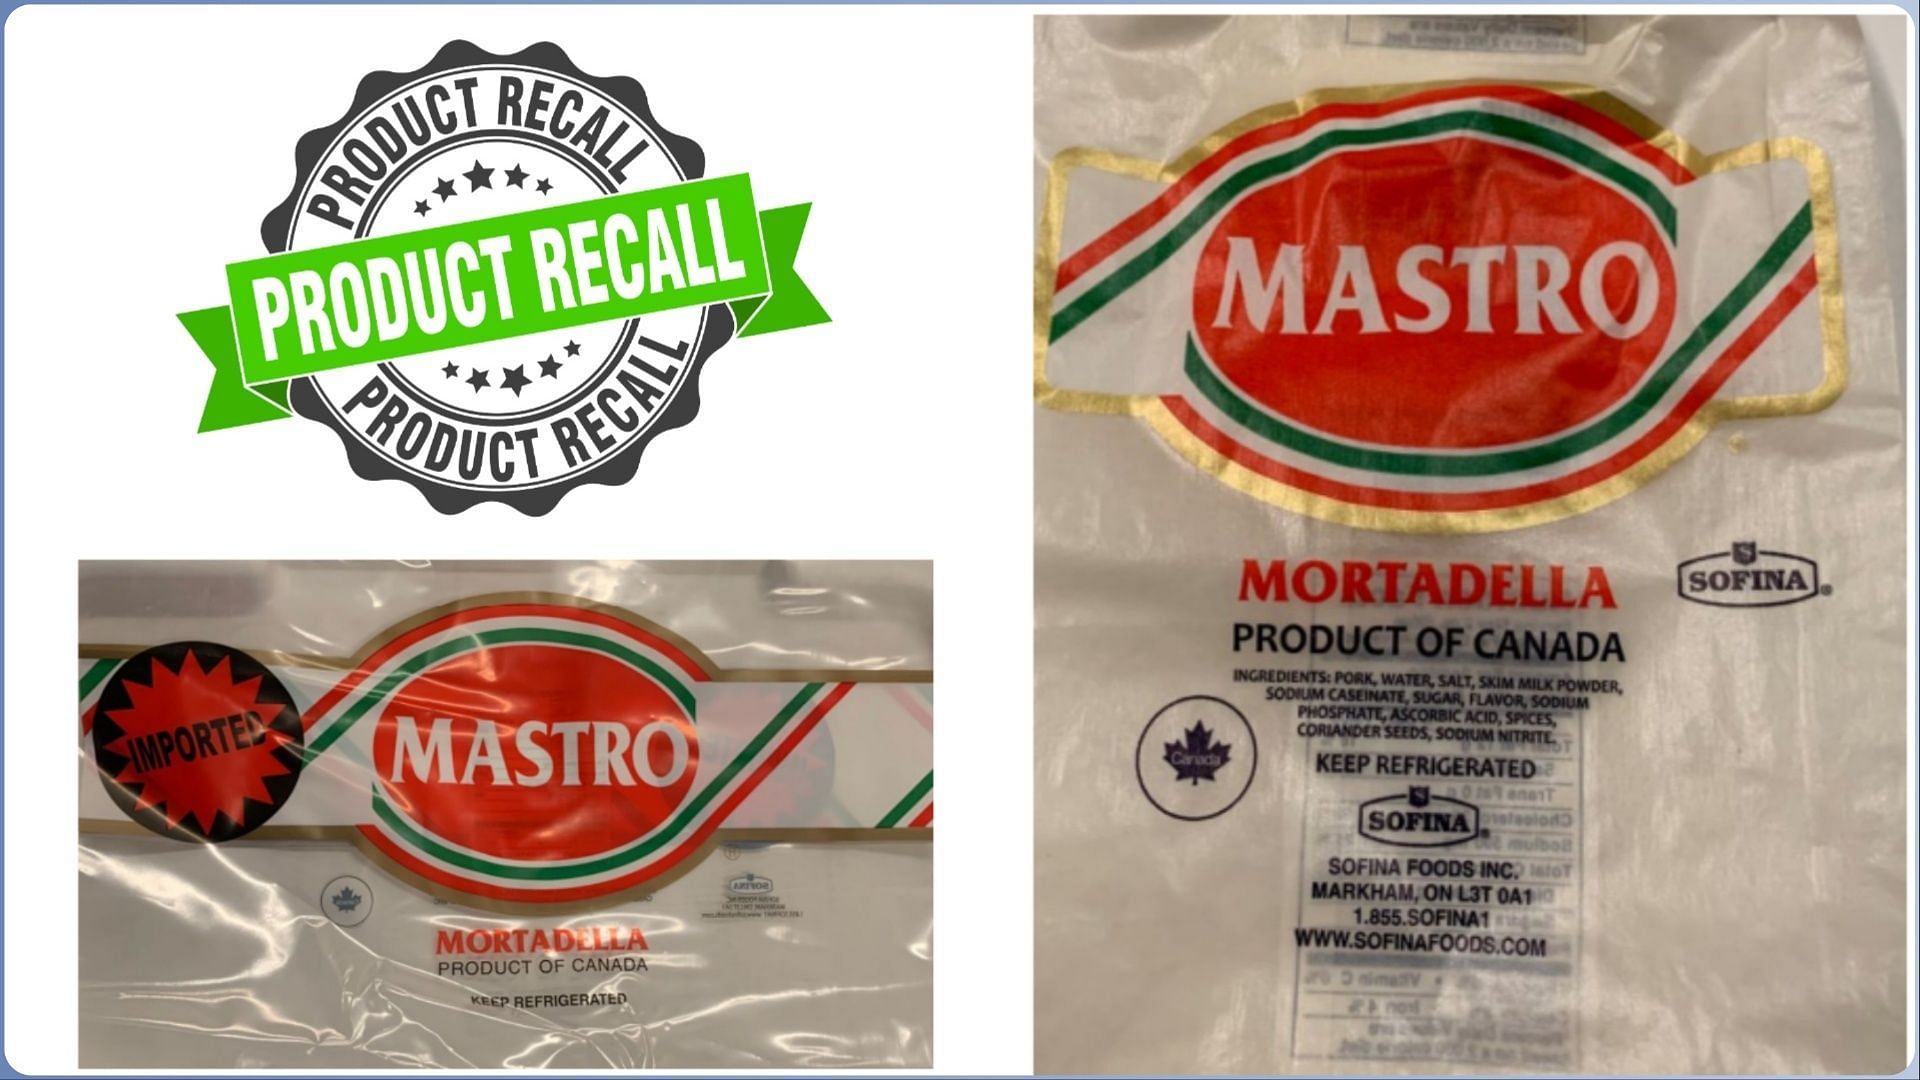 Sofina Foods Inc. recalls Ready-To-Eat Mortadella Deli Meat products over a misbranding and undeclared allergen concern (Image via FSIS)